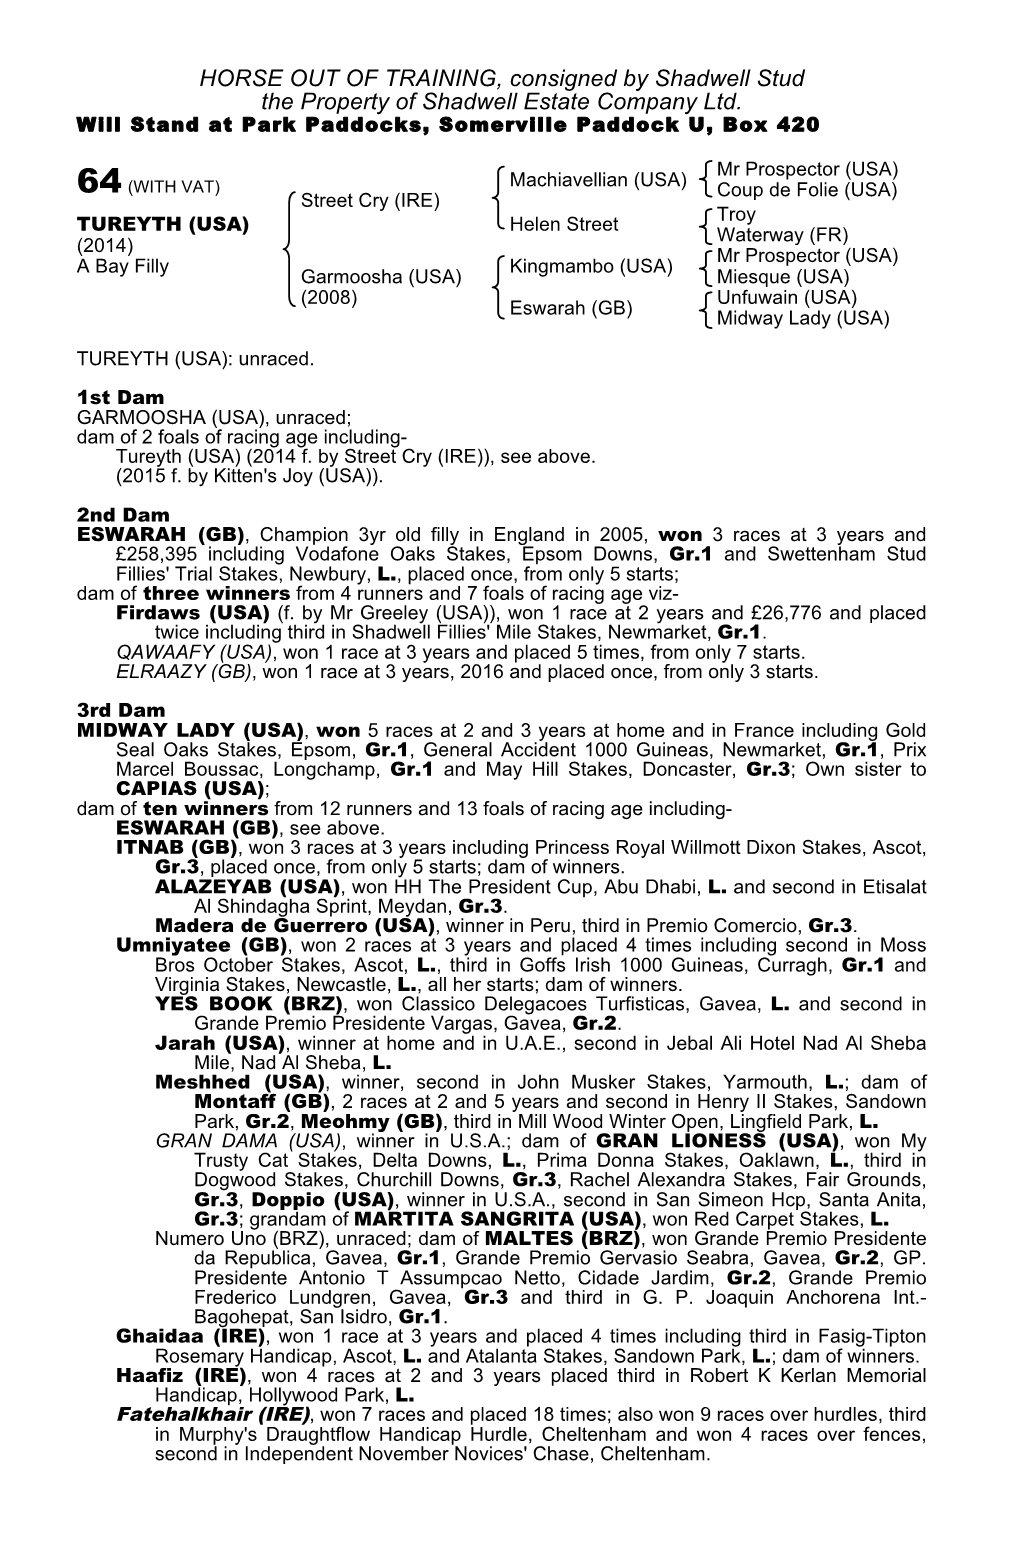 HORSE out of TRAINING, Consigned by Shadwell Stud the Property of Shadwell Estate Company Ltd. Will Stand at Park Paddocks, Somerville Paddock U, Box 420